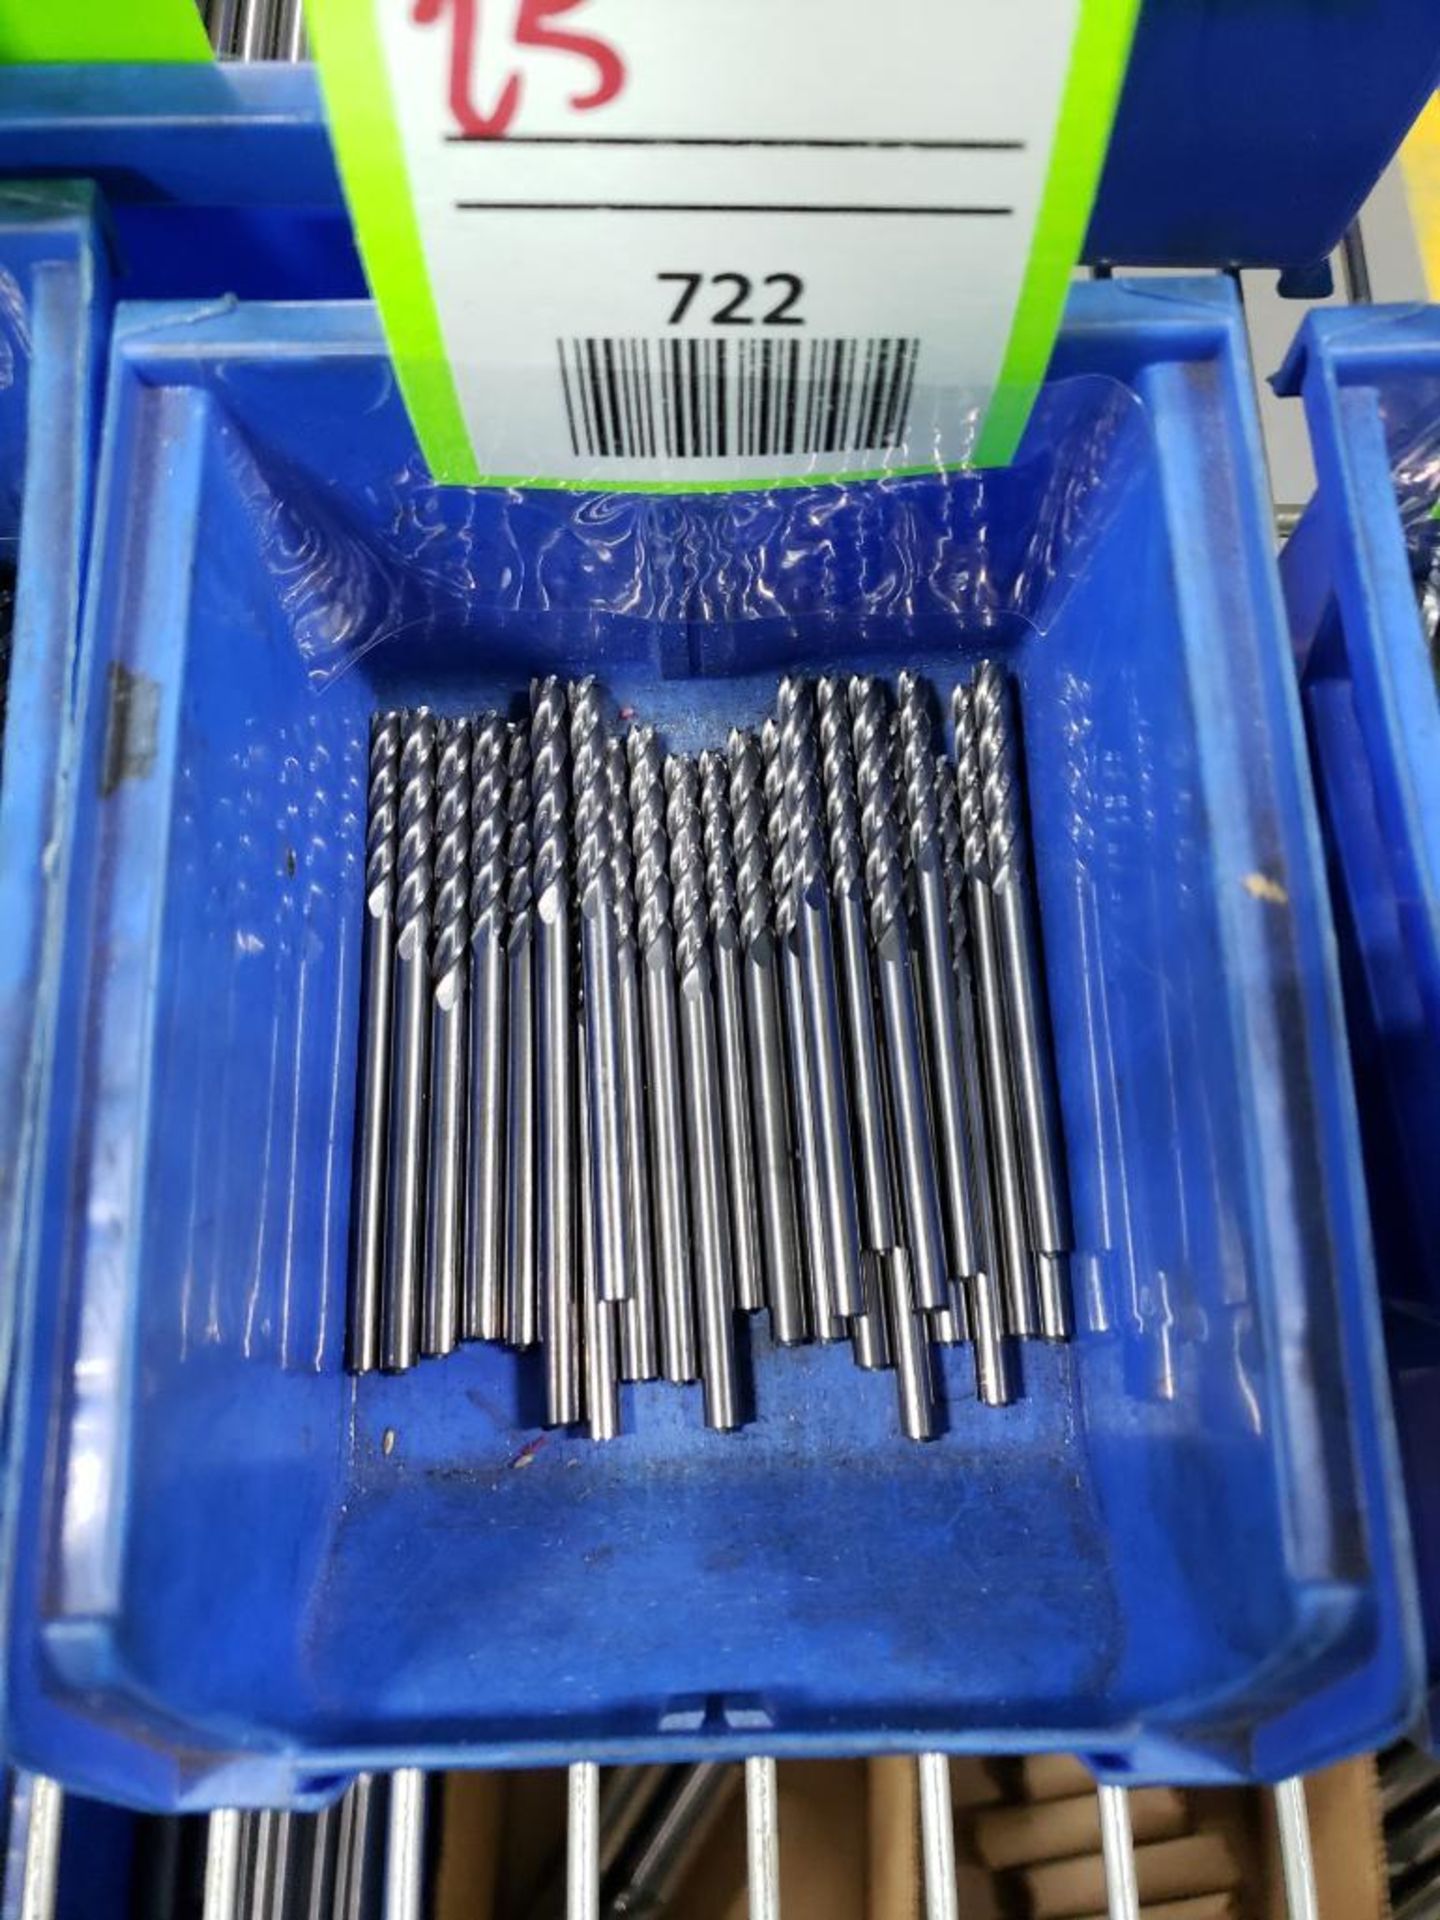 Qty 25 - Solid carbide end mills. (Tooling is either factory new or regrinds) - Image 2 of 2